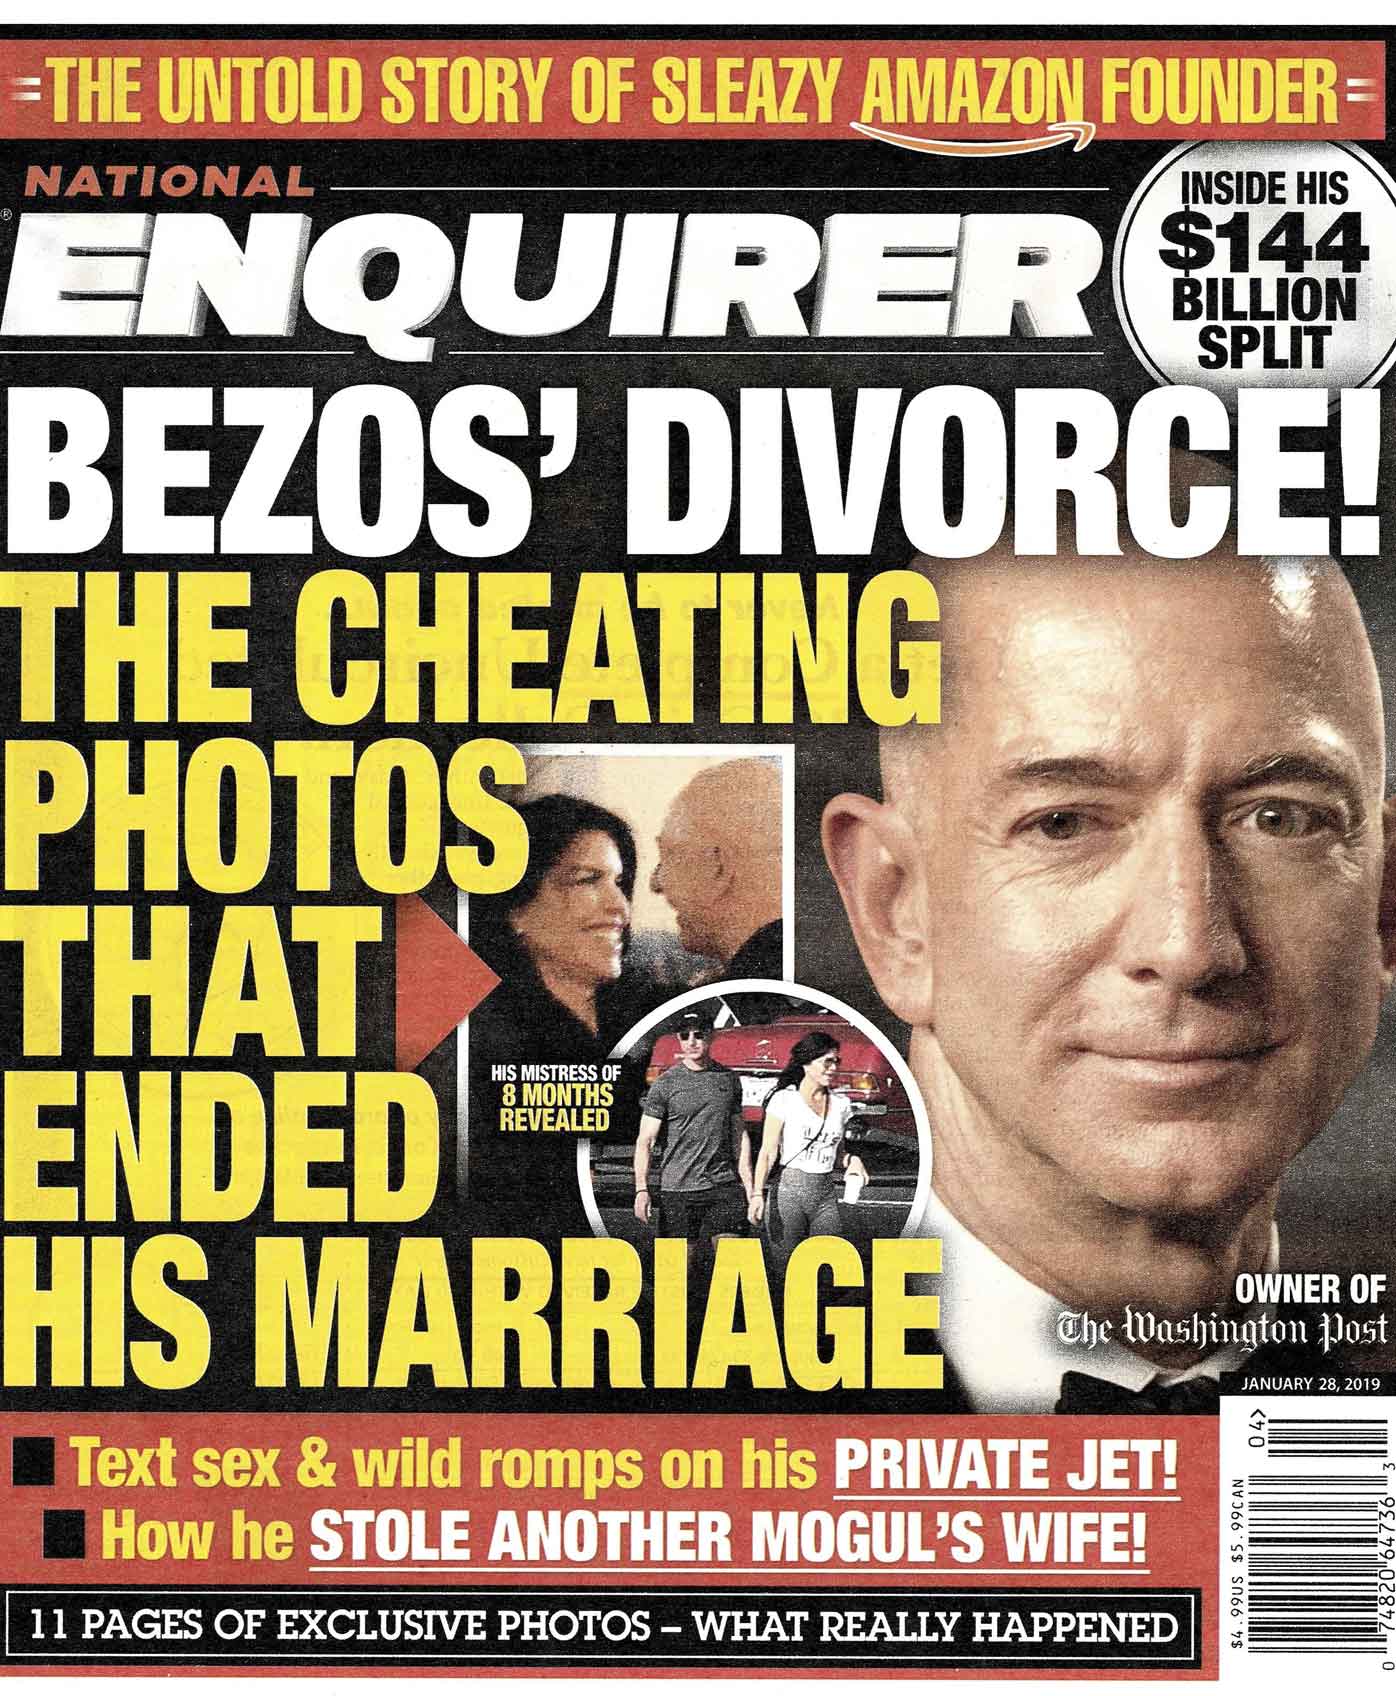 Jeff Bezos' marriage was brought undone by infidelity, reports of which were published by The National Enquirer.